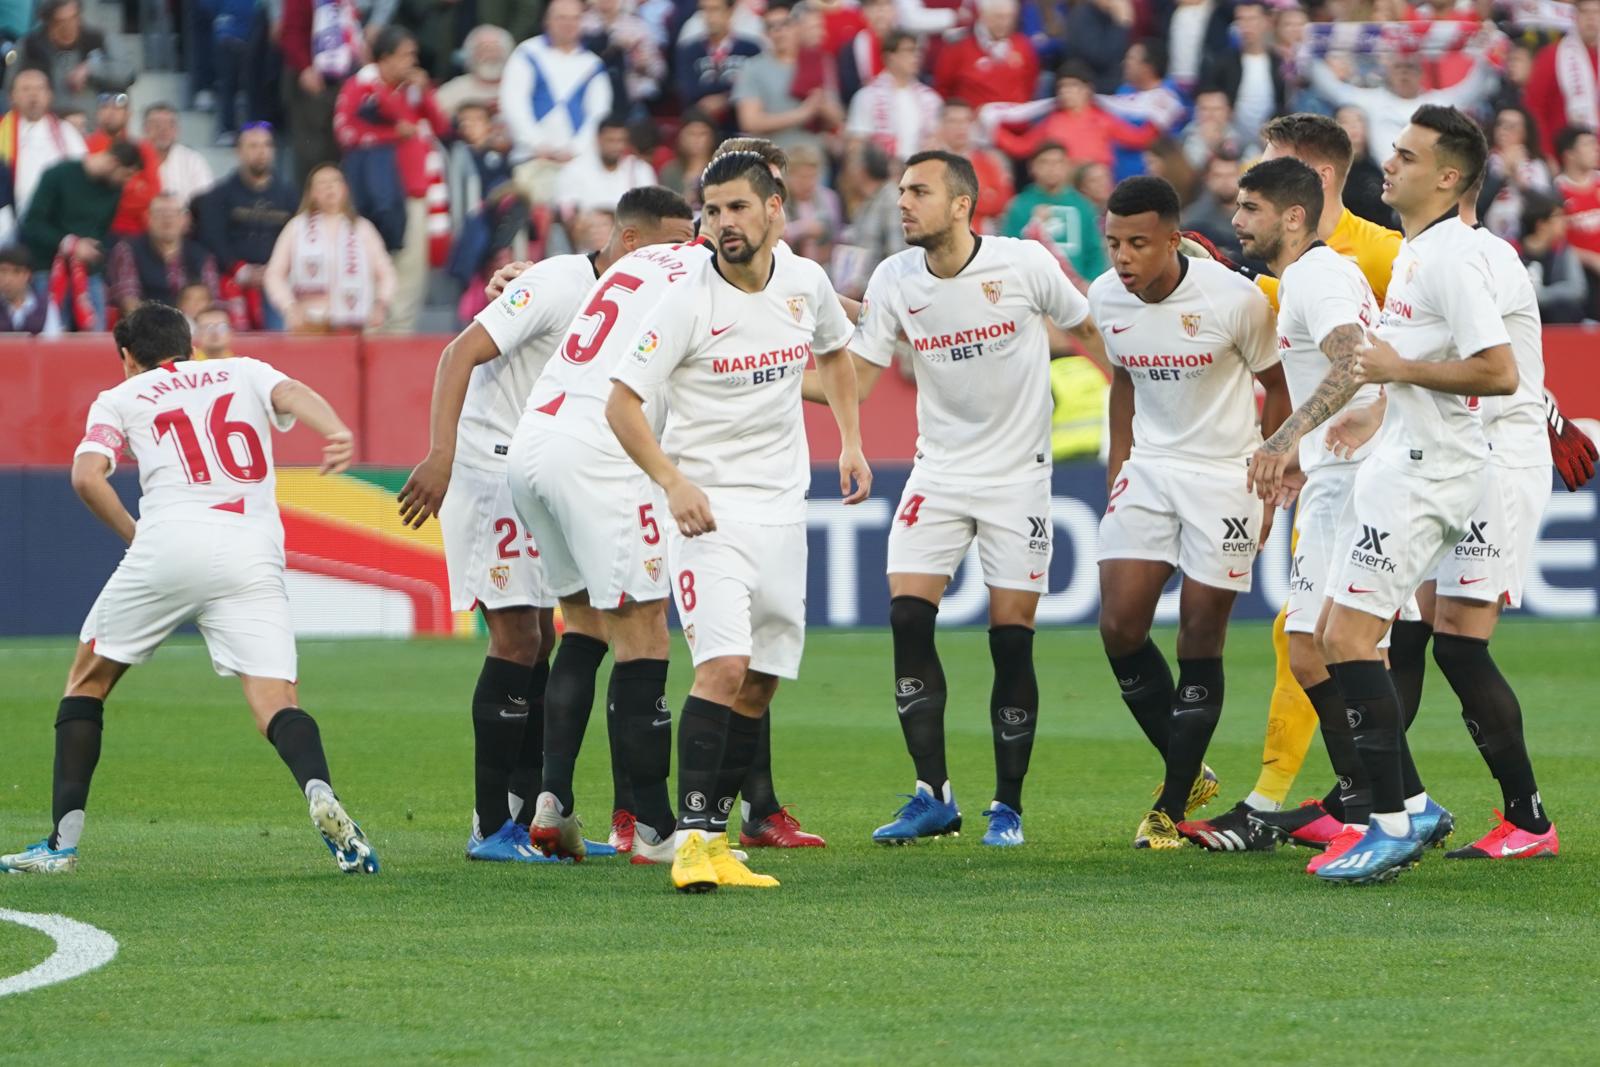 Sevilla FC before the game against Alavés